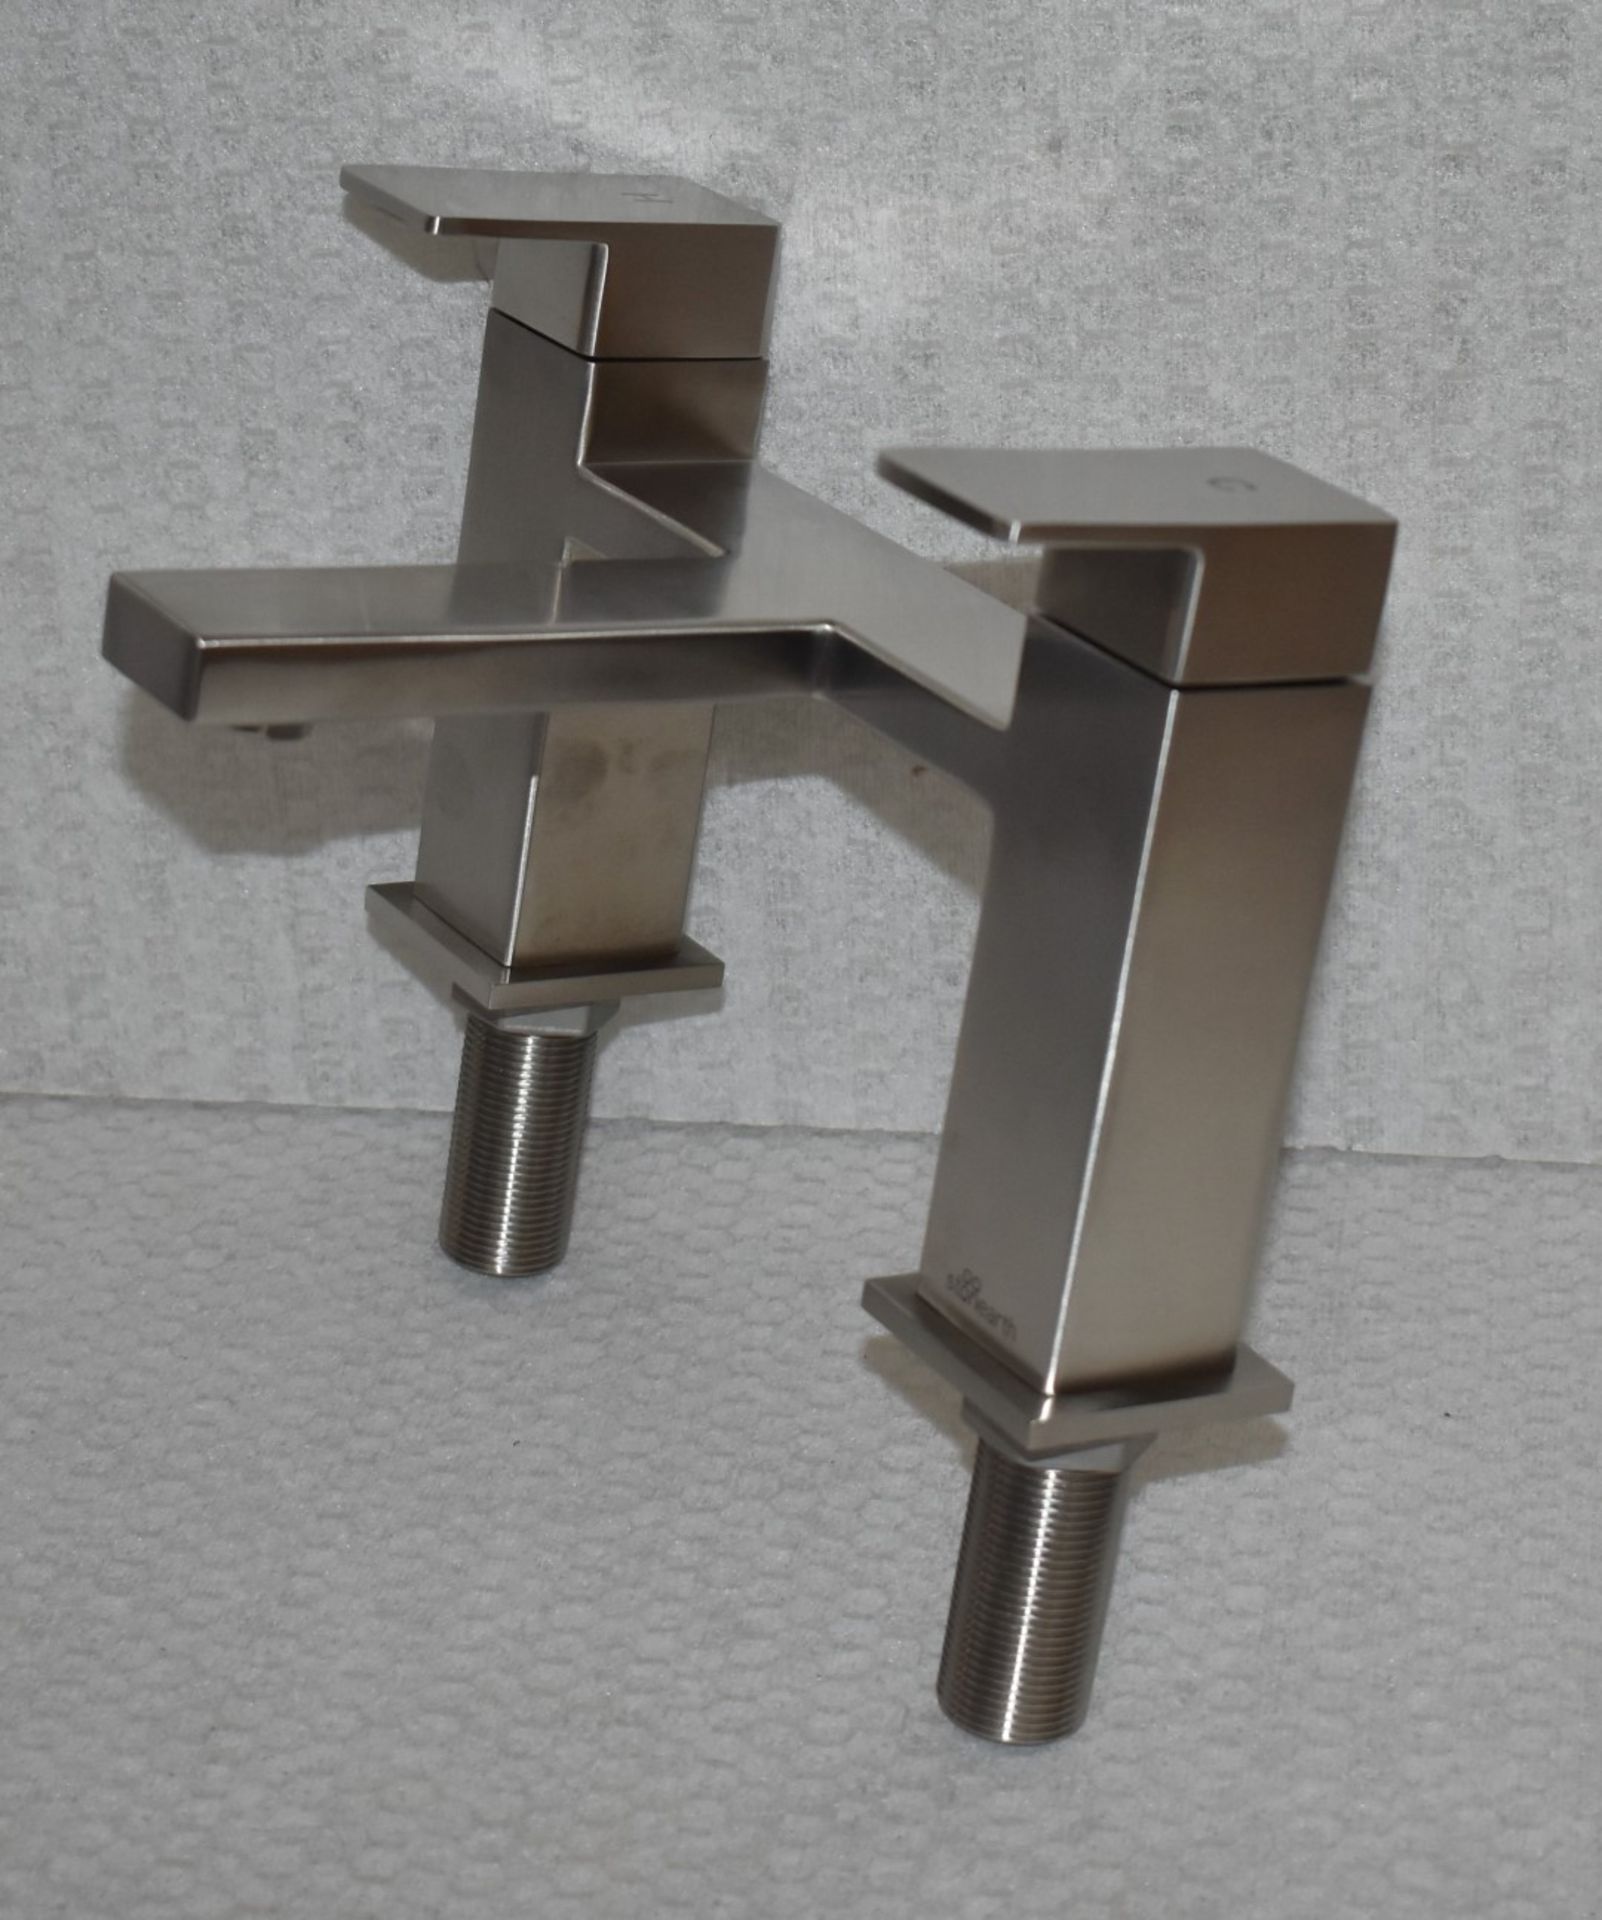 1 x Stonearth 'Metro' Stainless Steel Bath Filler Mixer Tap - Brand New & Boxed - RRP £340 - Ref: - Image 10 of 15